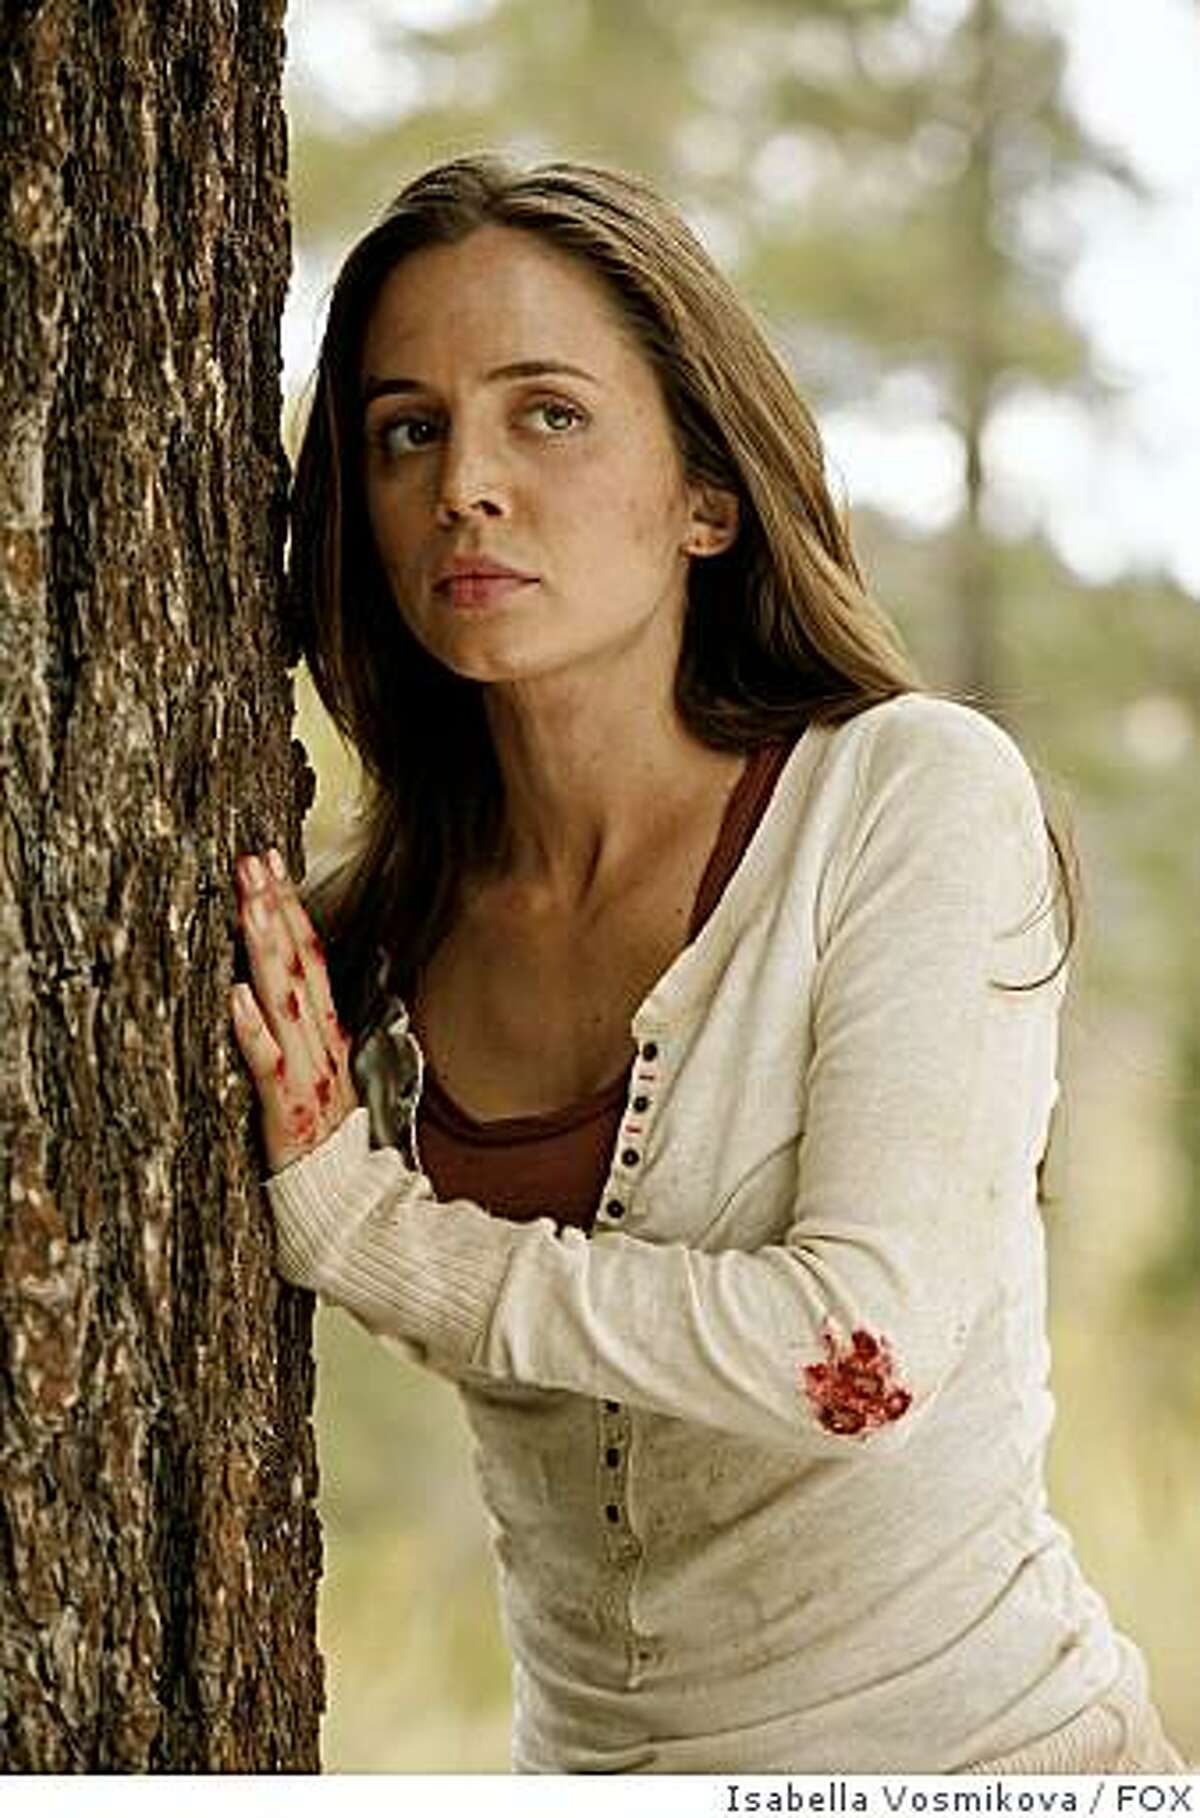 Eliza Dushku as Echo. DOLLHOUSE focuses on a secret organization that employs "Actives" -- a group of operatives who have their memories and personalities wiped clean so they can be imprinted with new ones, allowing them to take on various missions for hire. The Actives don't just act like new people, they become new people, yet they are never aware they are pawns in someone else's game in DOLLHOUSE premiering Friday, Feb. 13 (9:00-10:00 PM ET/PT) on FOX.